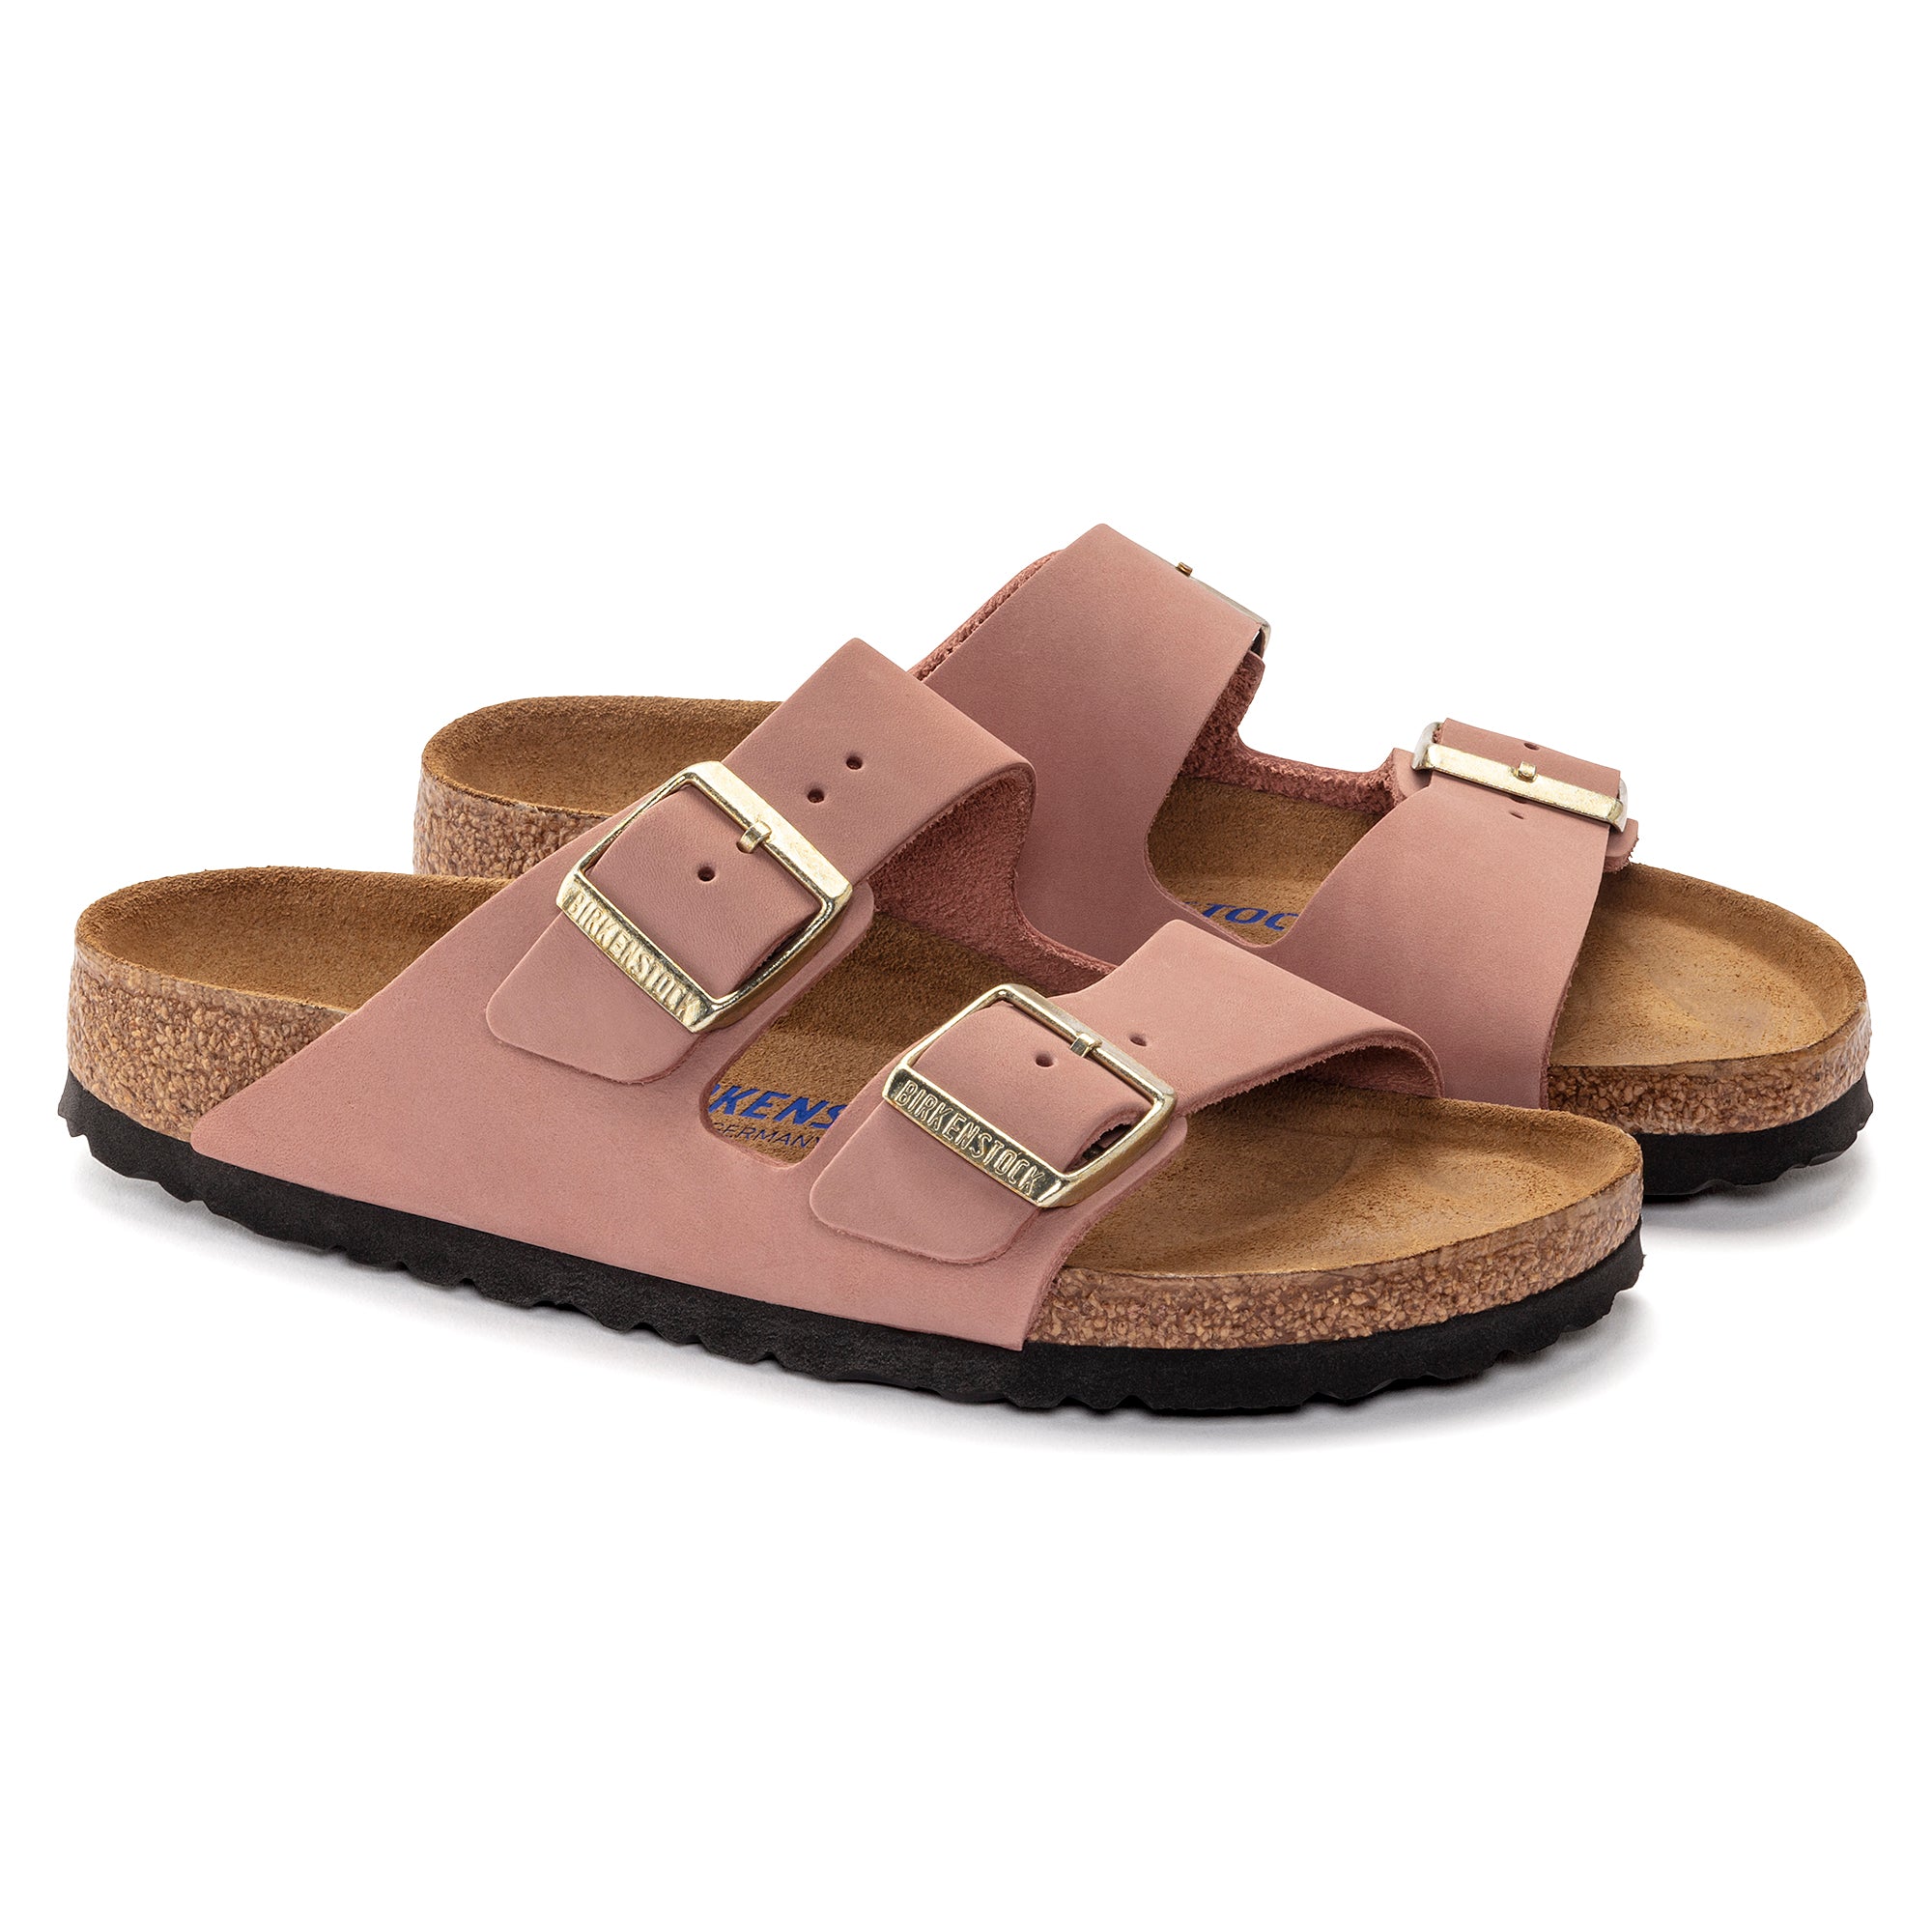 Arizona Nubuck Leather in Old Rose (Soft Footbed)